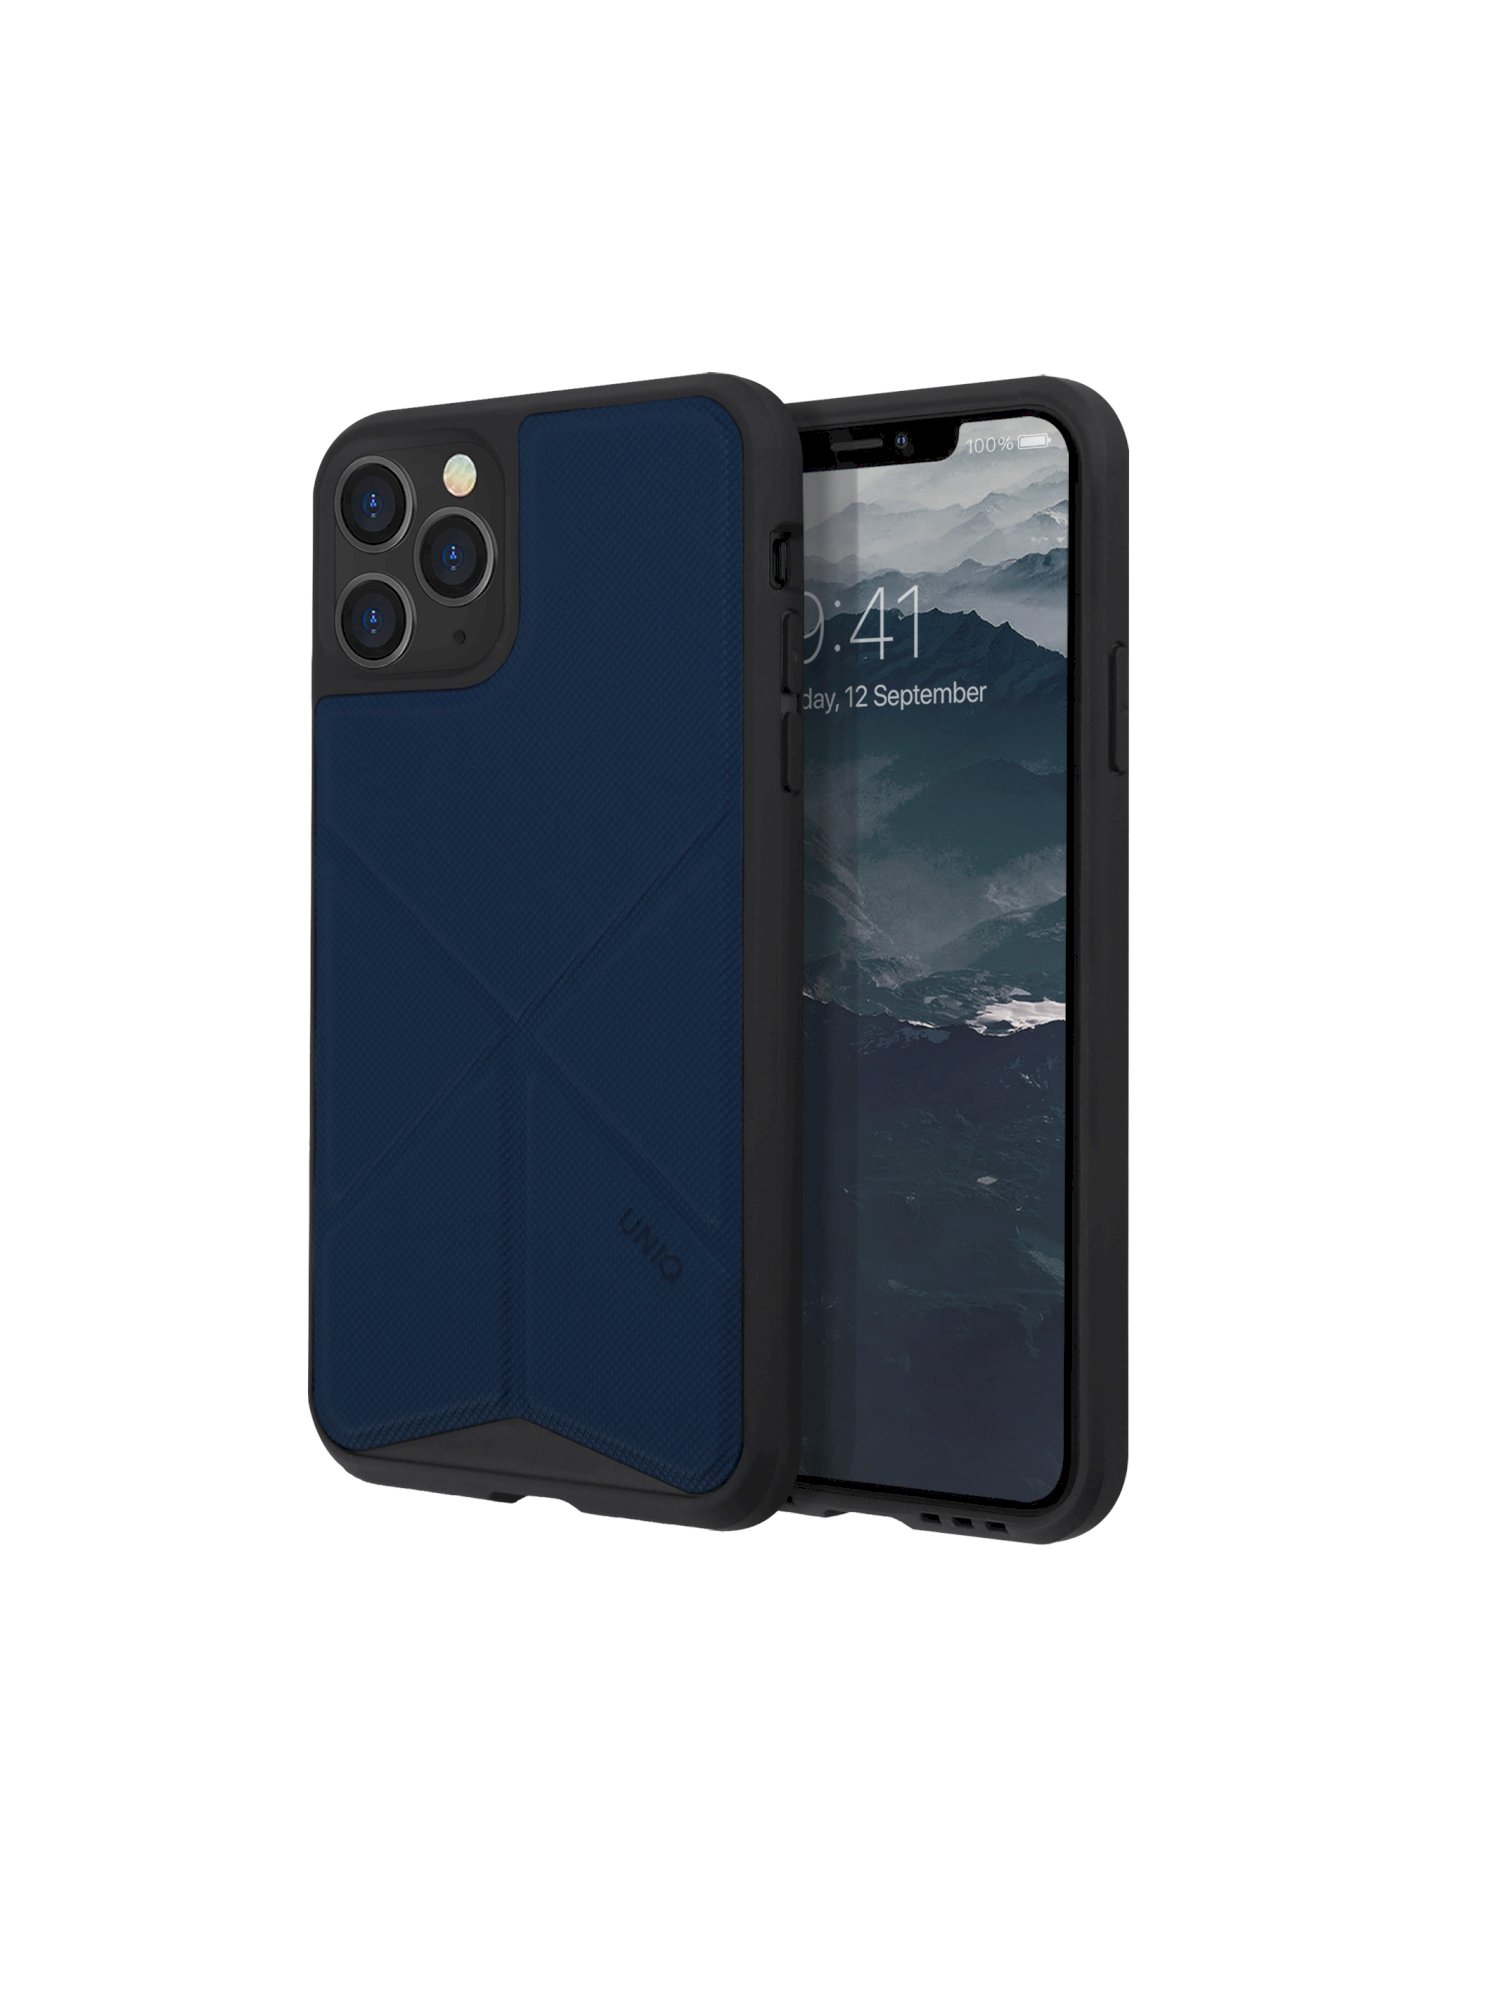 iPhone 11 Pro, hoesje transforma, stand up navy panther, blauw